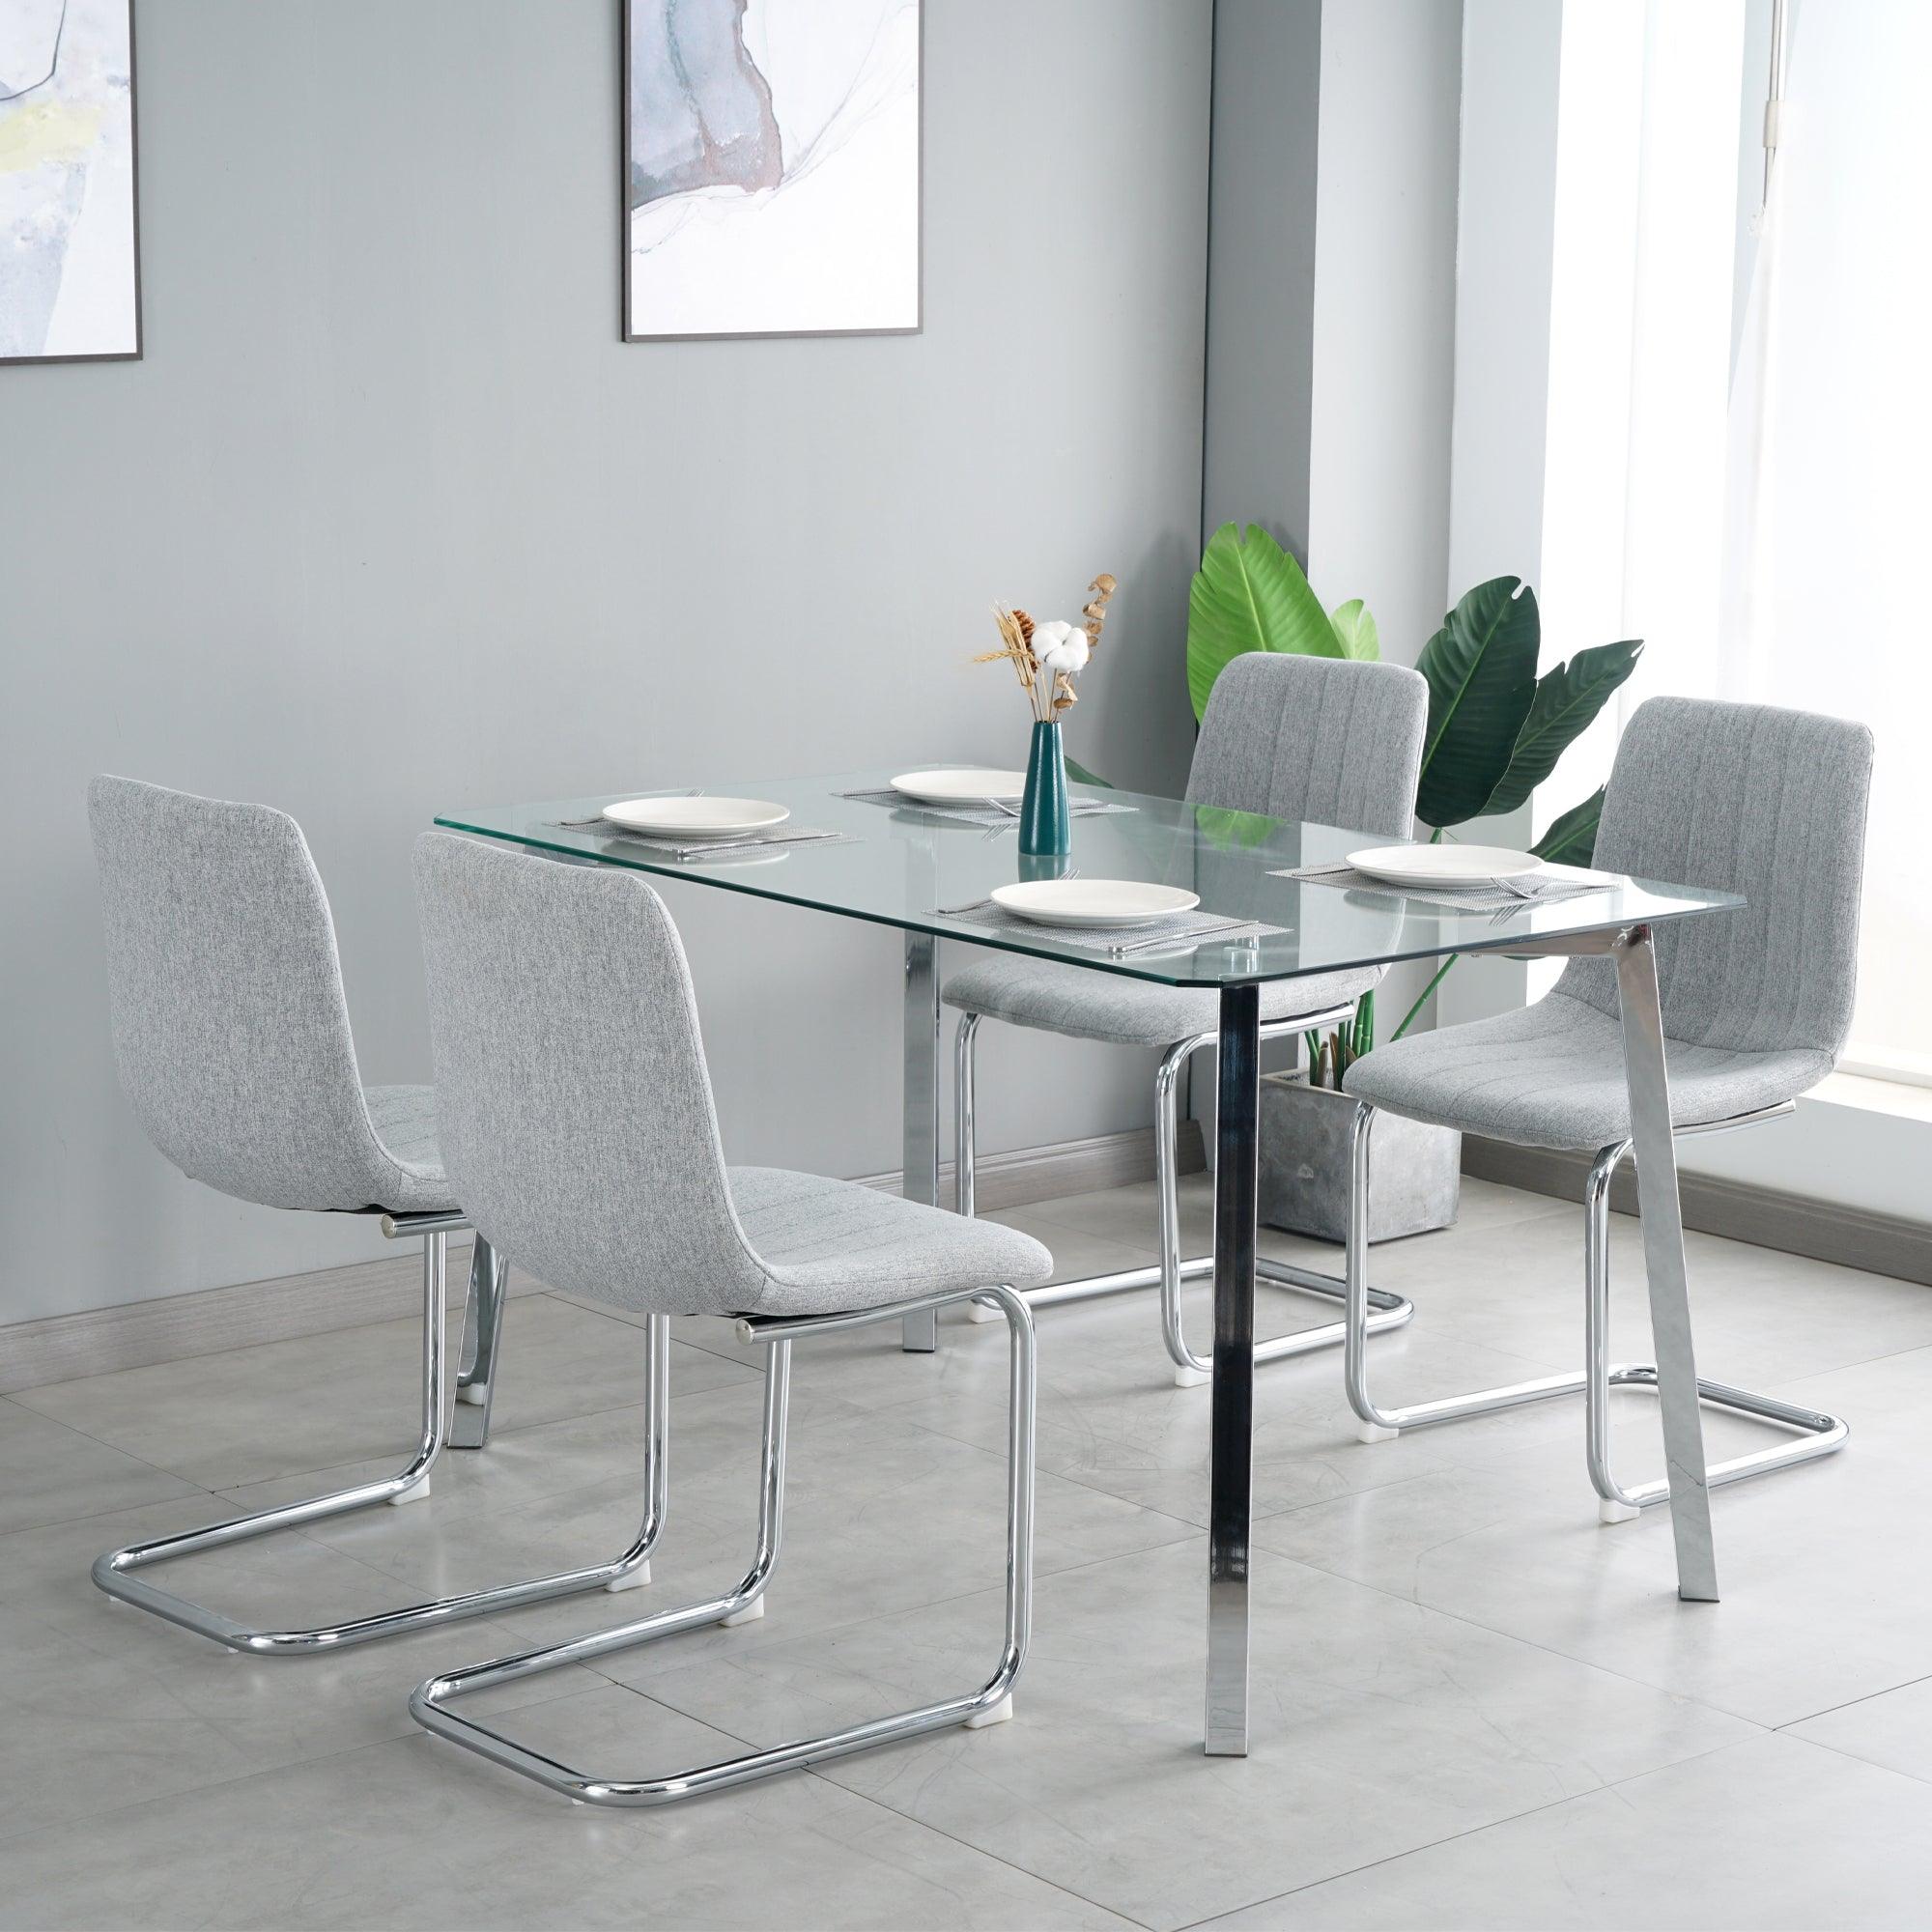 🆓🚛 Table & Chair Set, 1 Table & 4 Chairs, Clear Tempered Glass Table Top, 0.3 Feet Thick, Silver Metal Legs Bow Chair With Electroplated Metal Legs